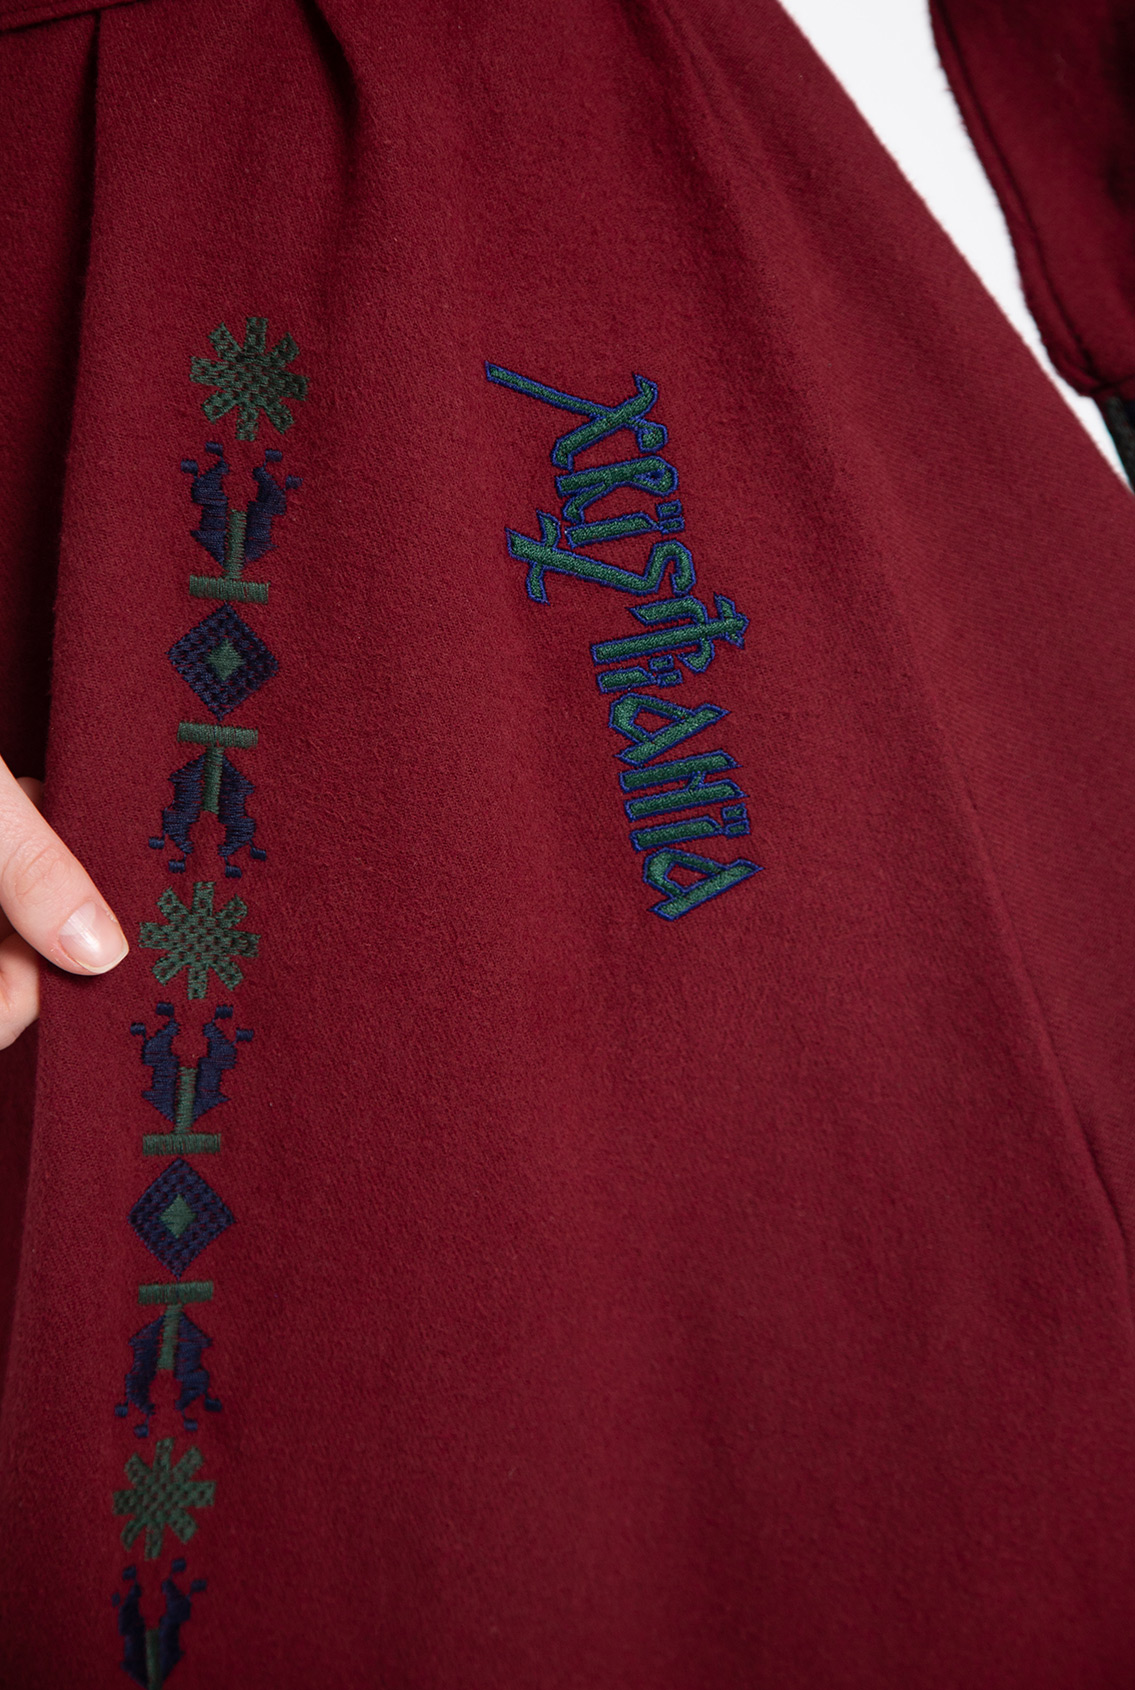 embroidery on the dress